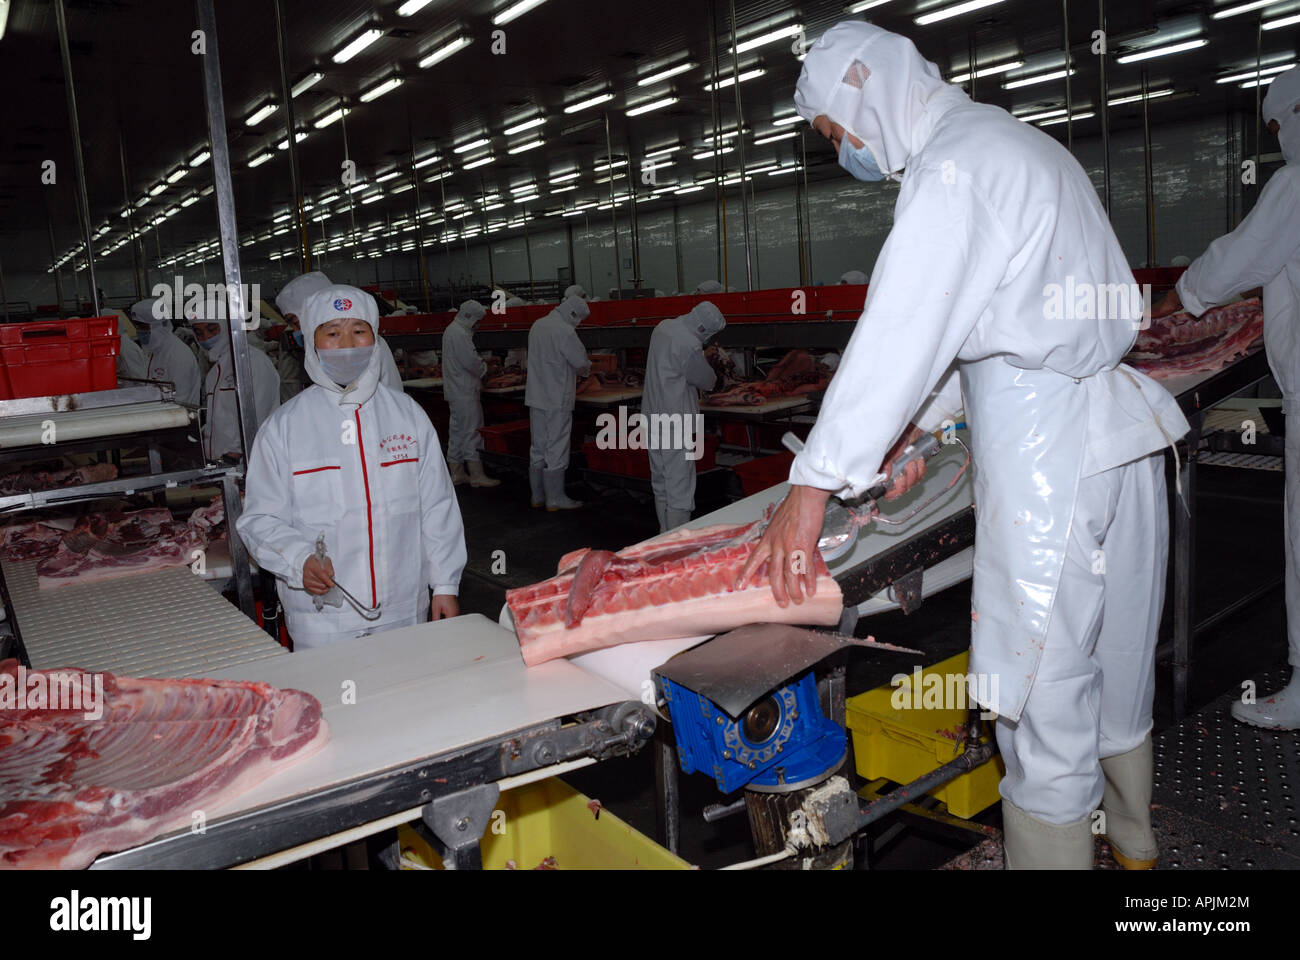 Shineway Shuanghui Industrial Group meat processing plant Pork production line Henan Province China Asia Stock Photo